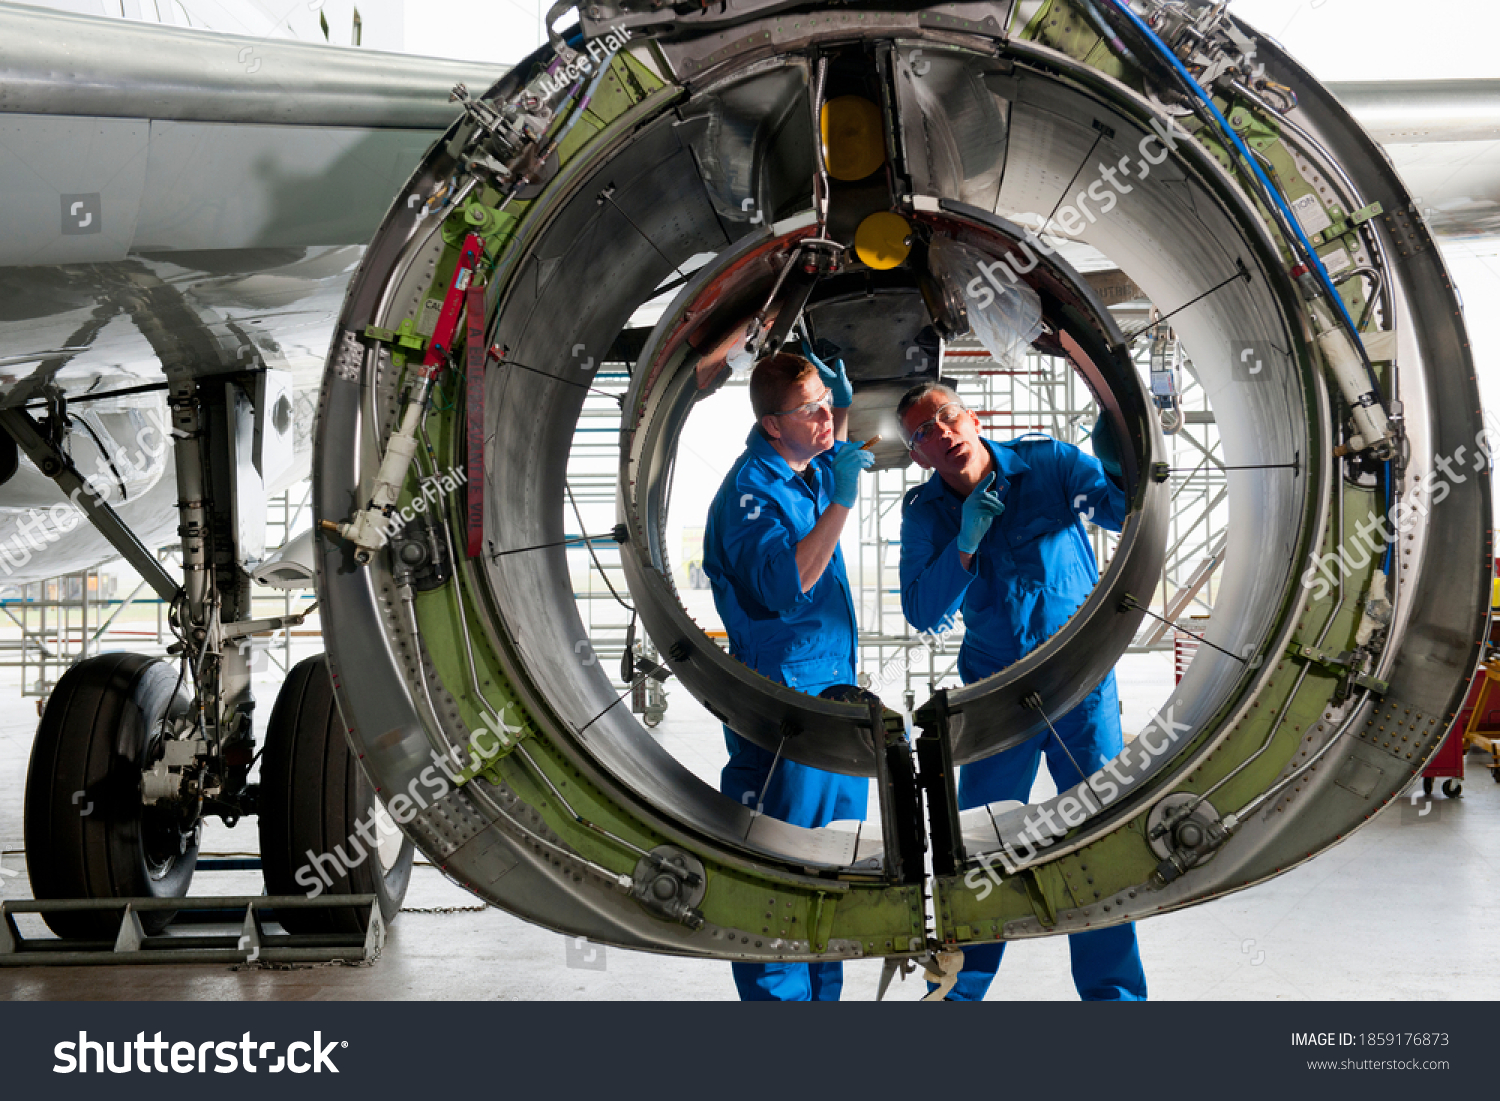 Engineers in uniforms inspecting the engine casing of a passenger jet at a hangar. #1859176873